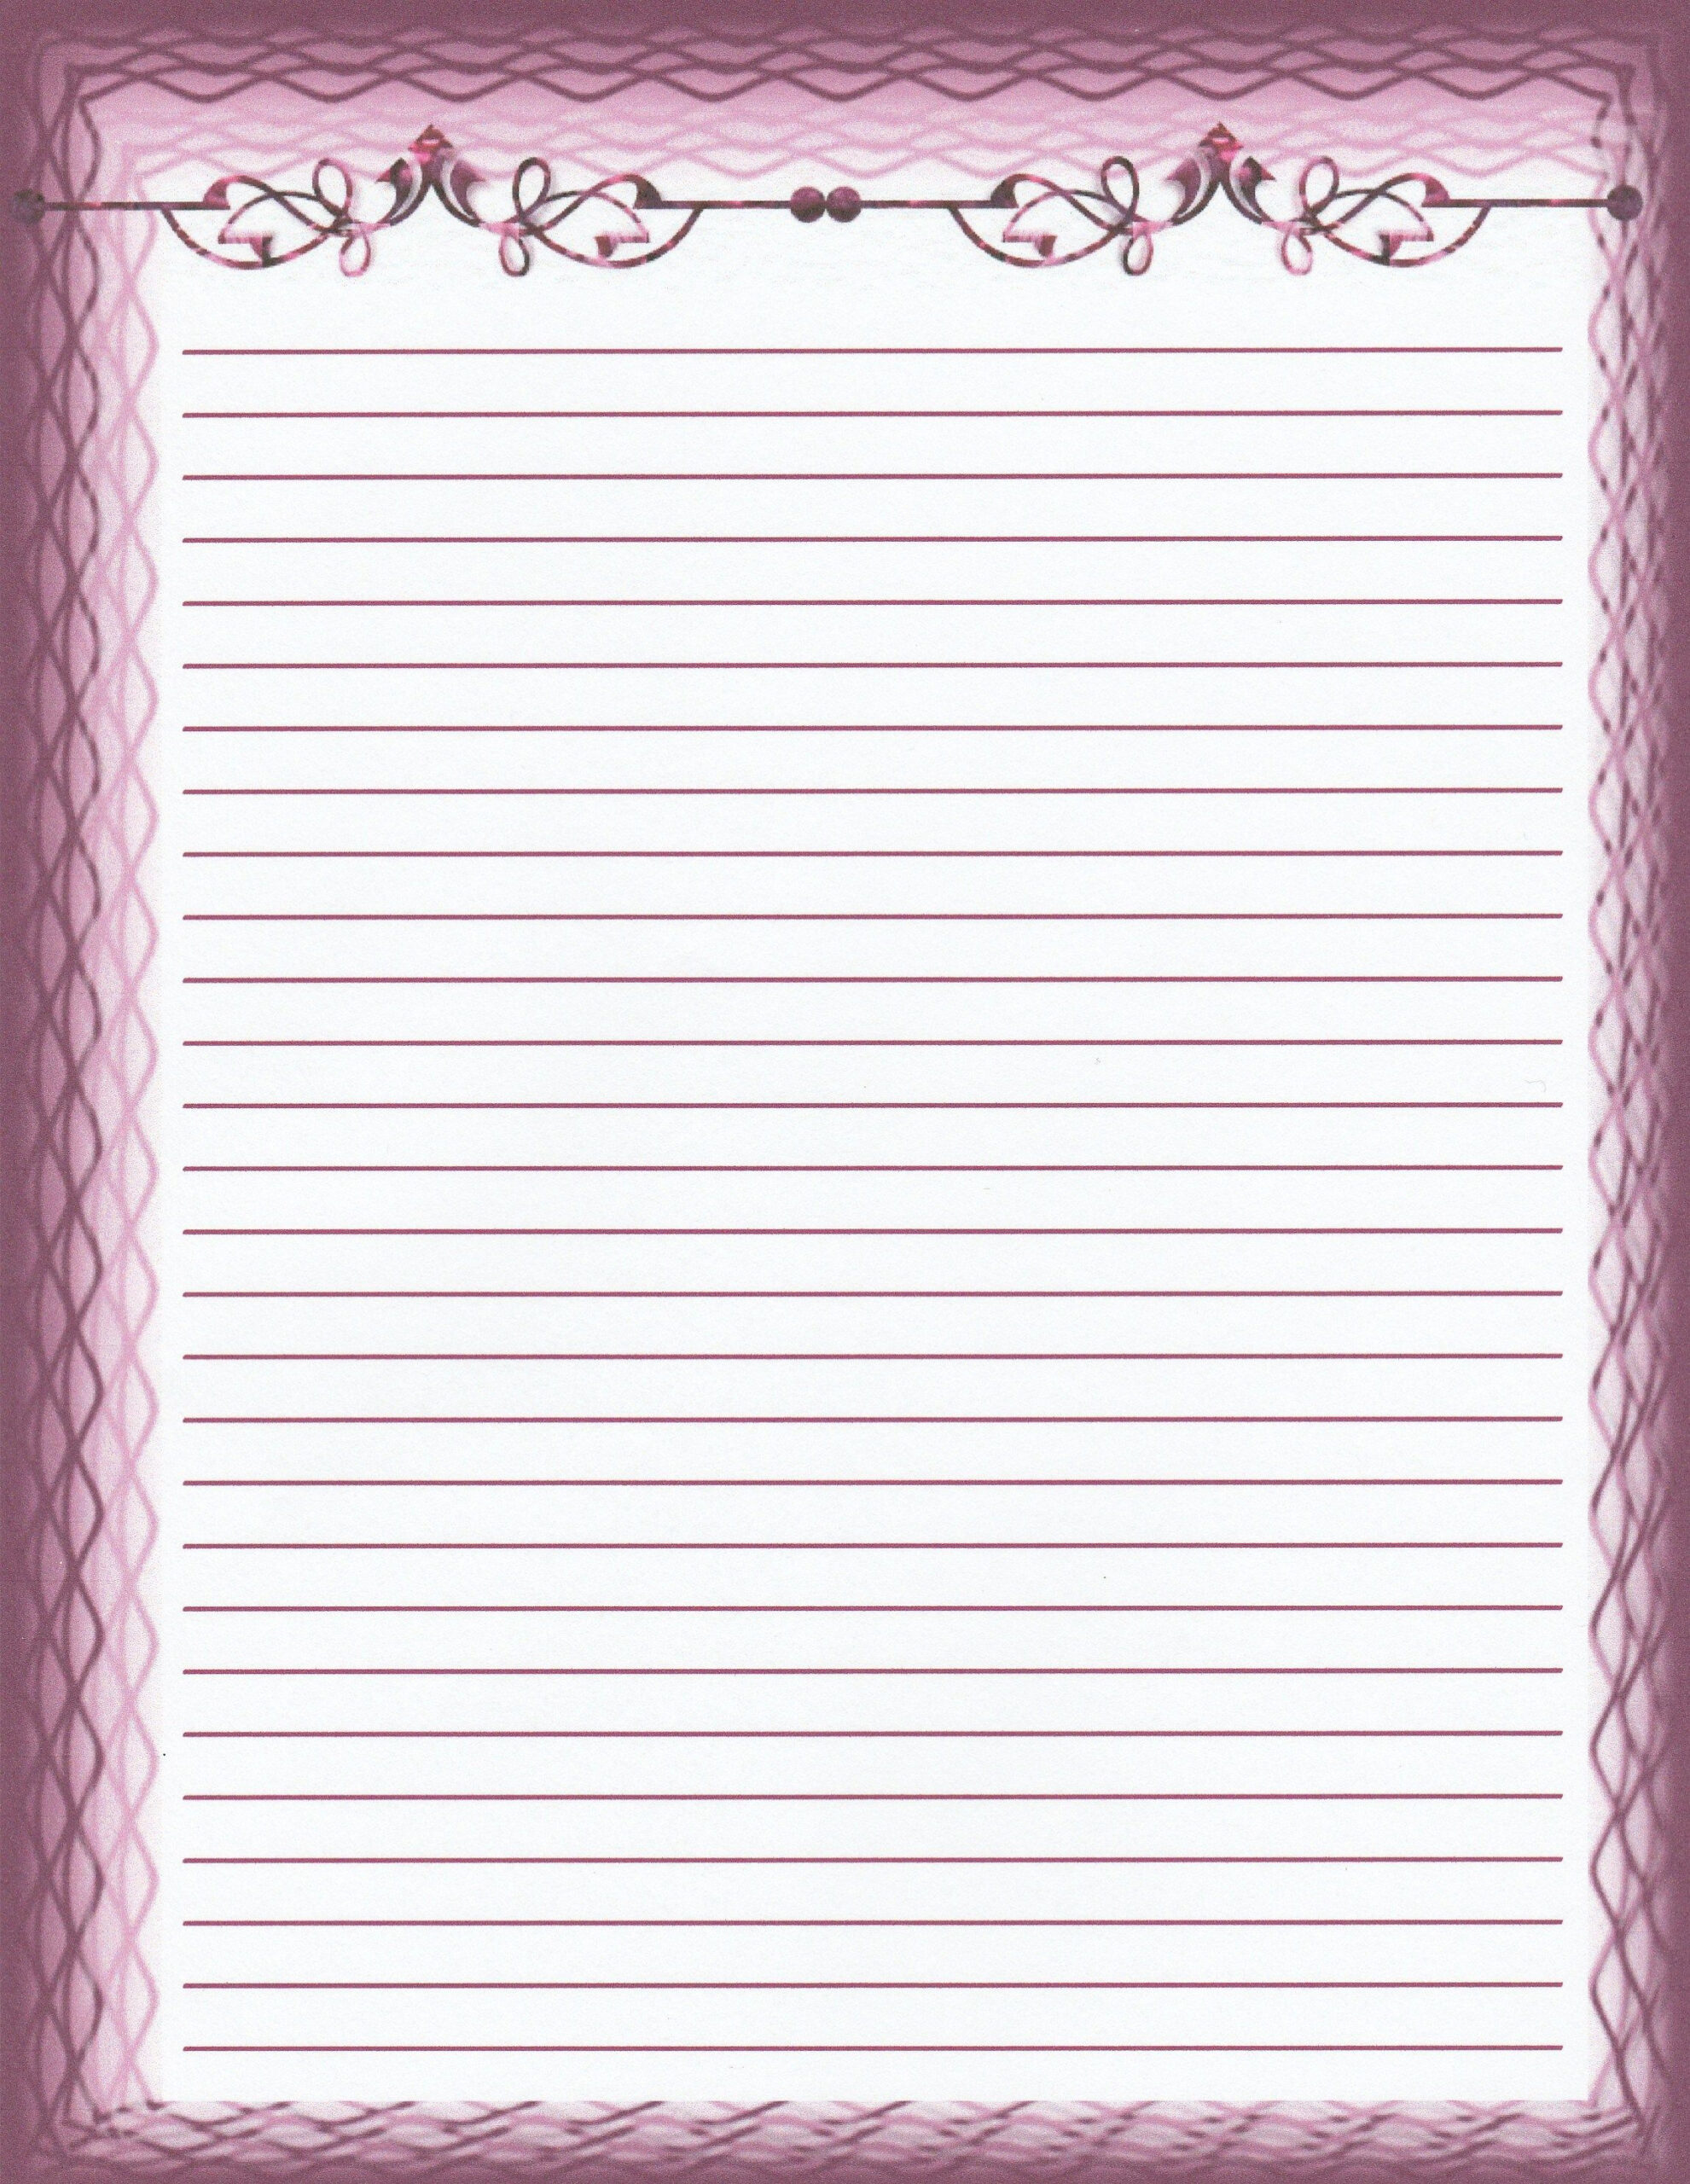 Lined Stationery Paper Free